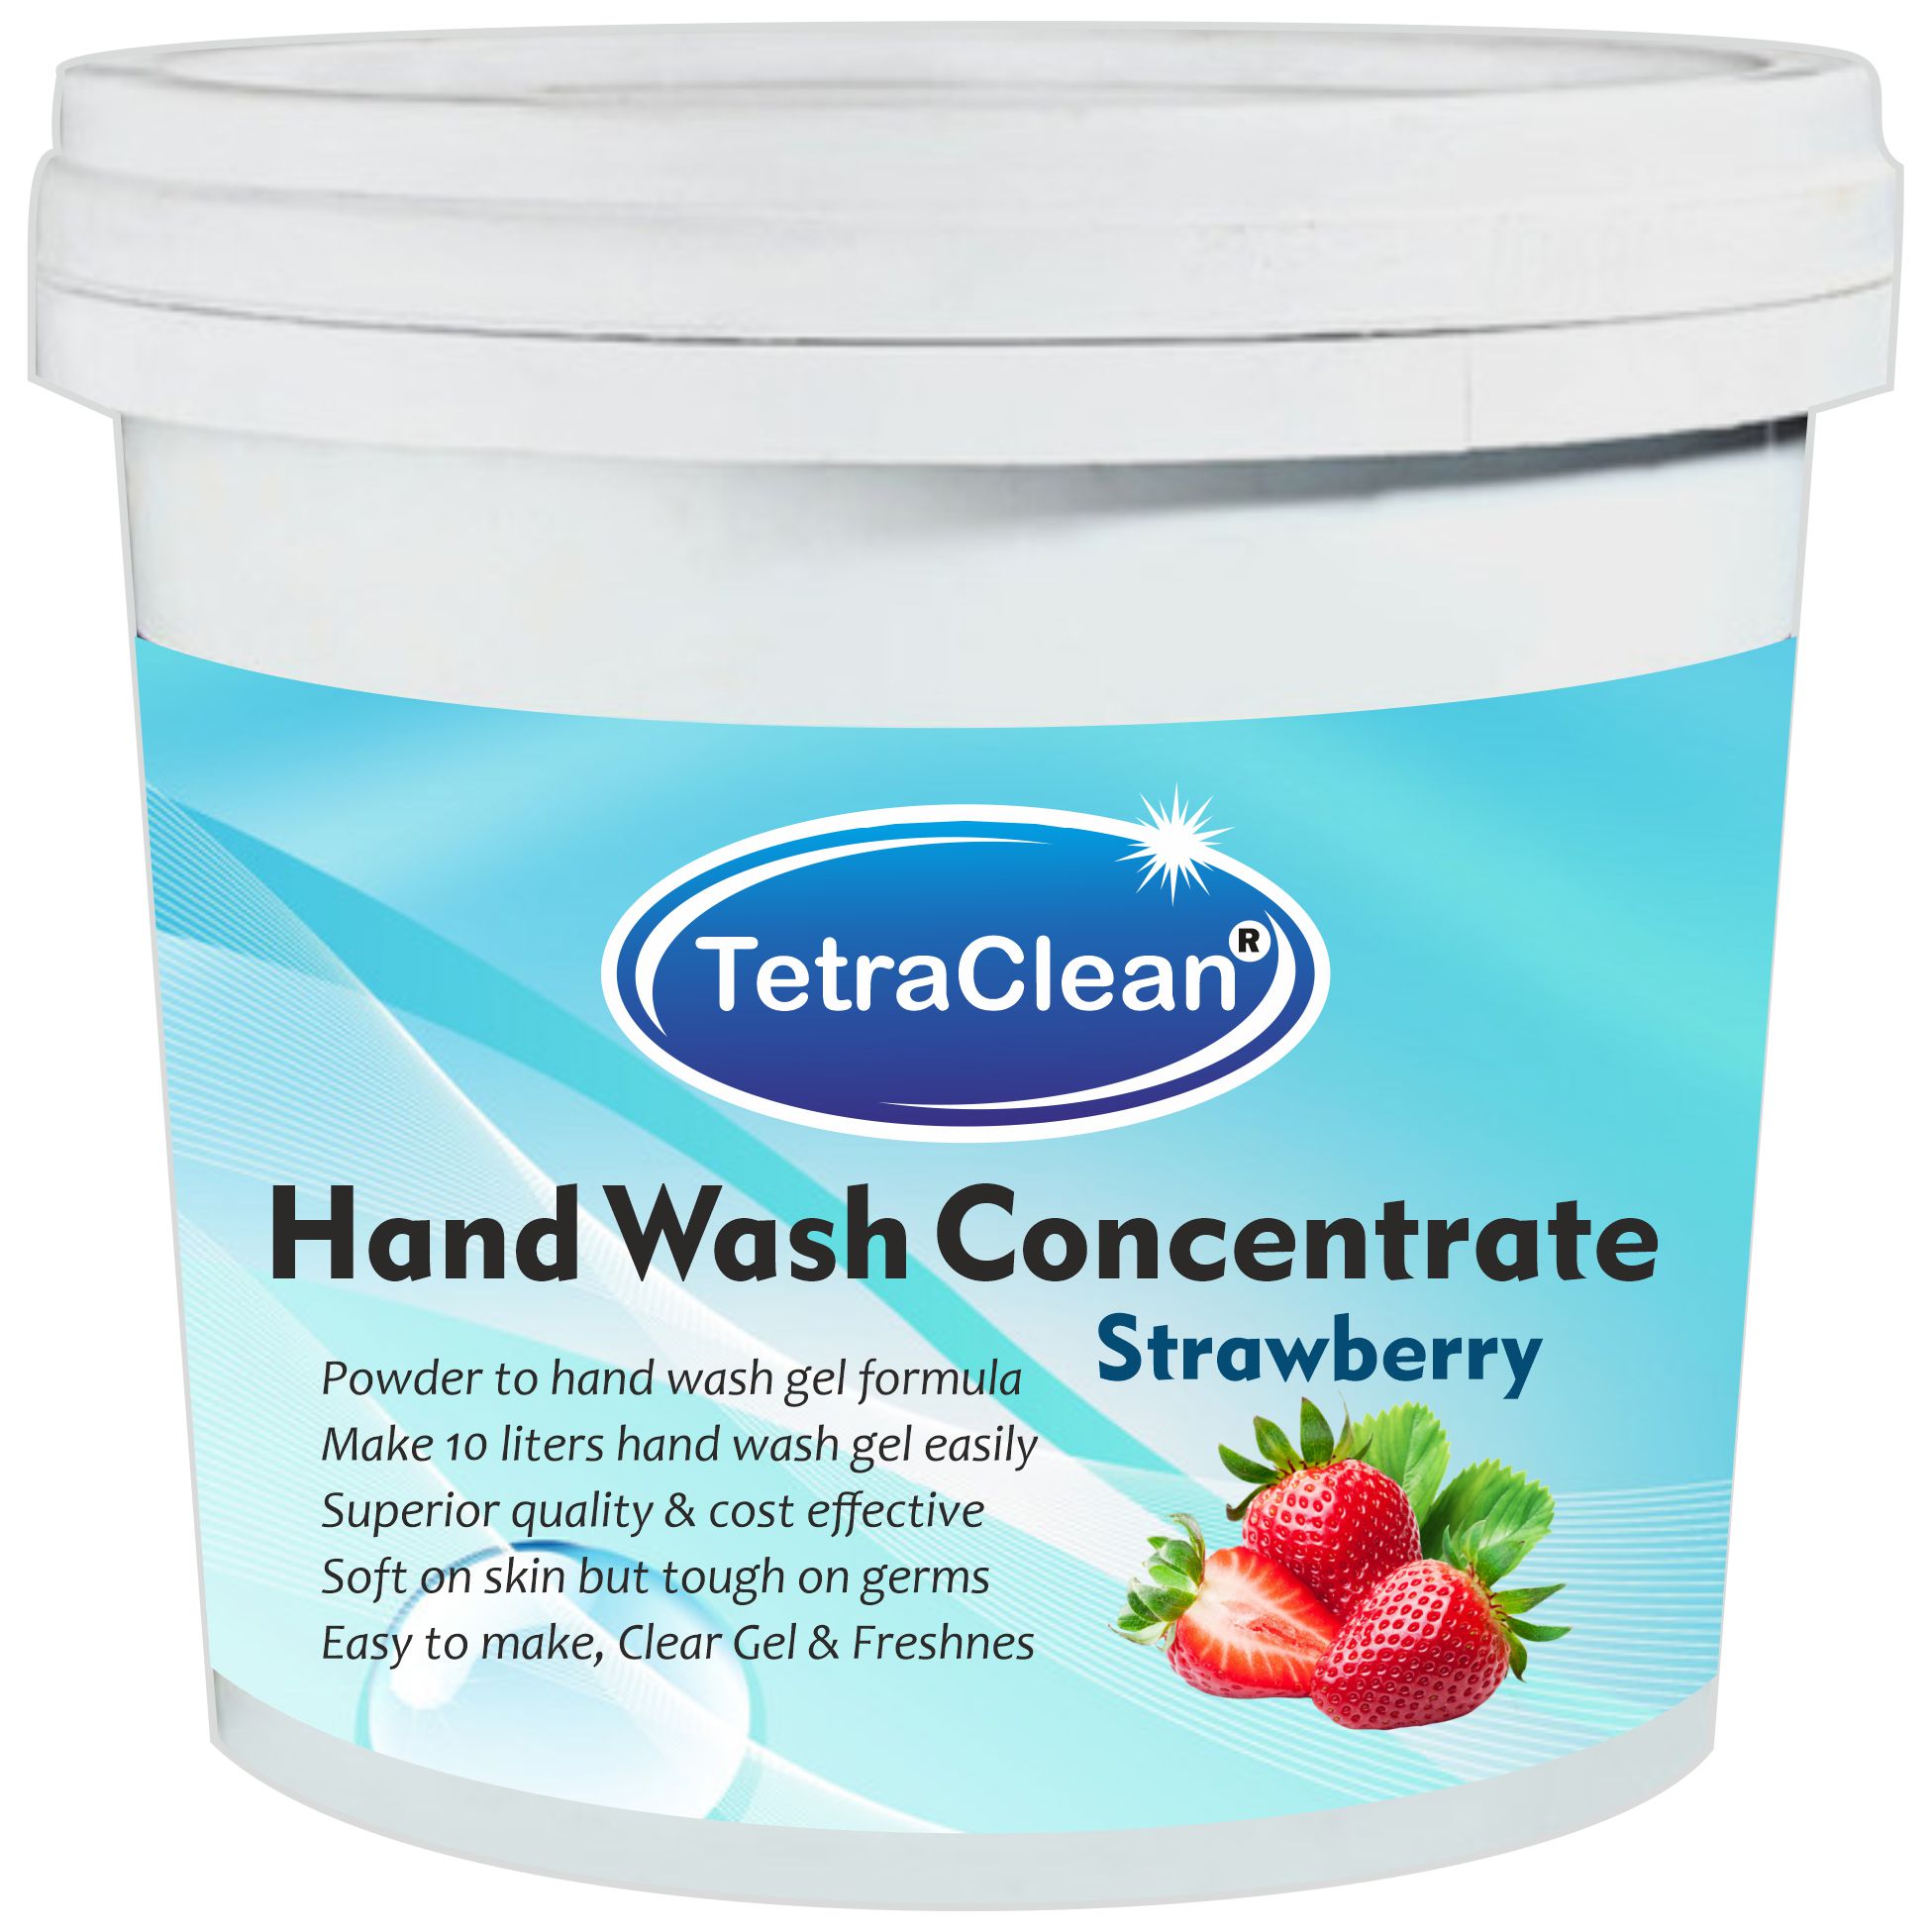 TetraClean Hand Wash Concentrate Powder - 500gm packing - with strawberry fragrance